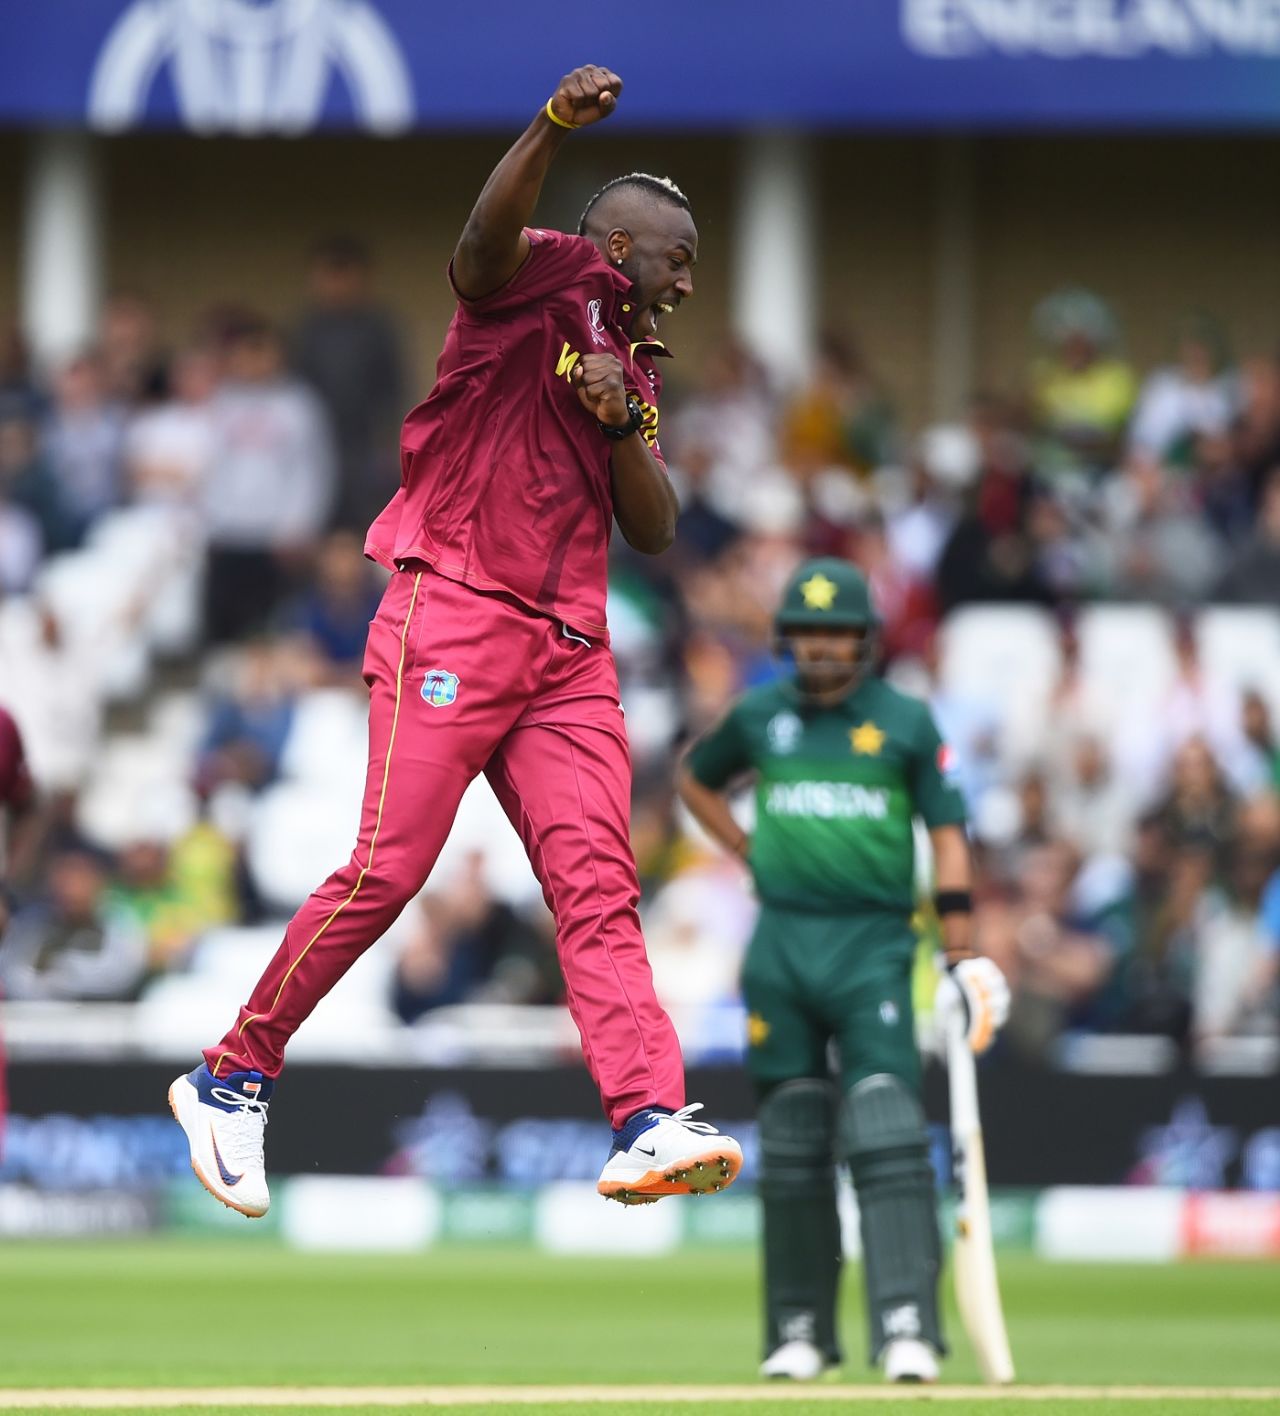 Andre Russell celebrates Fakhar Zaman's wicket, Pakistan v West Indies, World Cup 2019, Trent Bridge, May 31, 2019